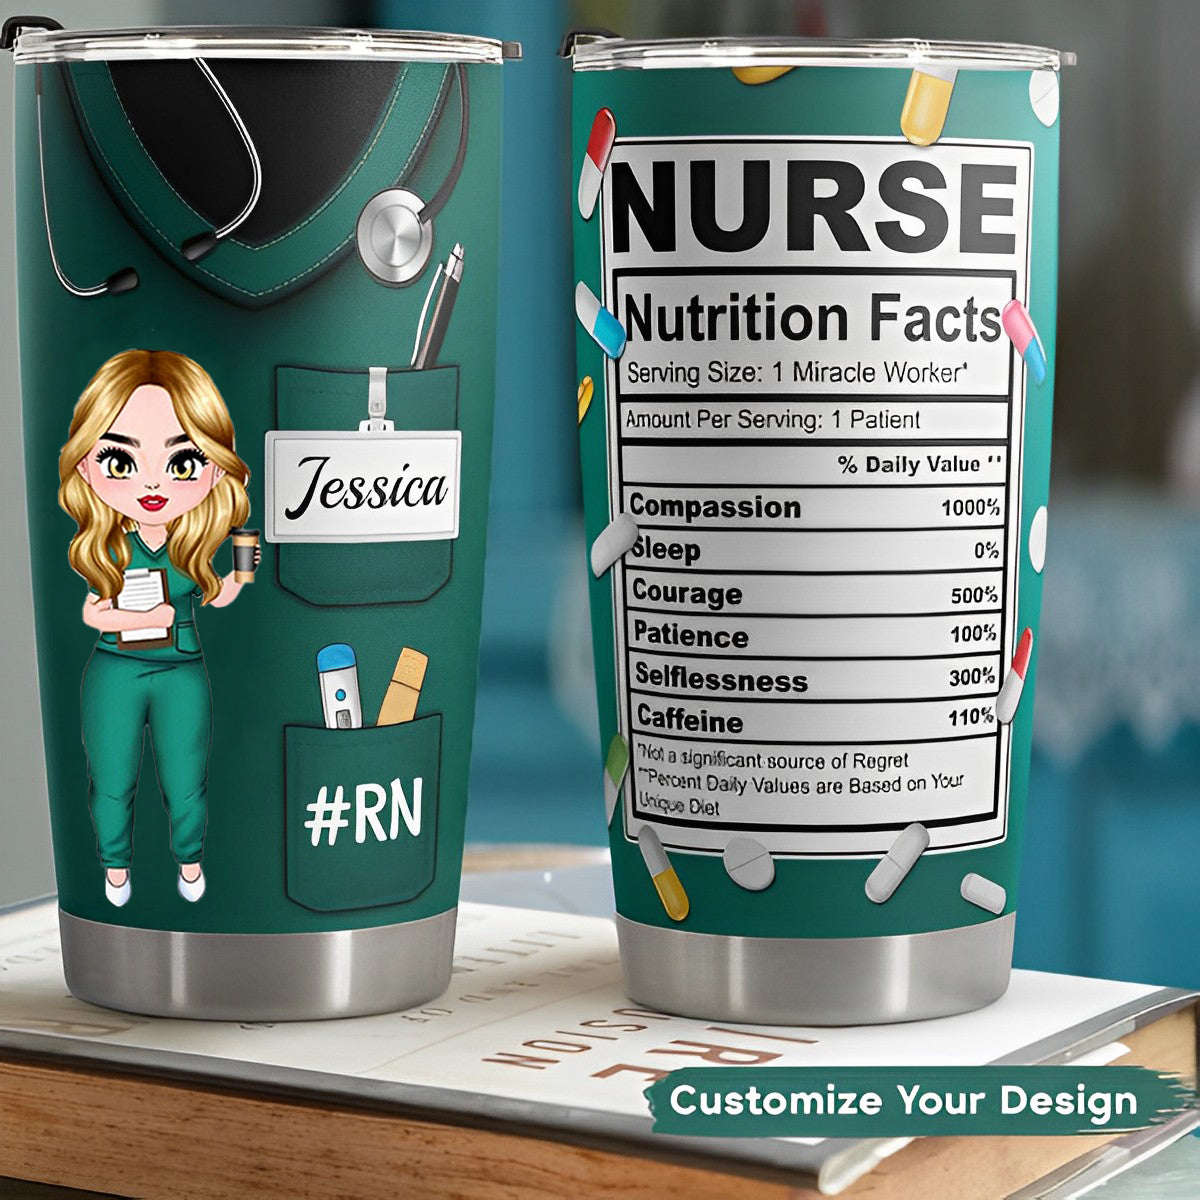 Nurse Nutrition Facts New Version - Personalized Tumbler Cup